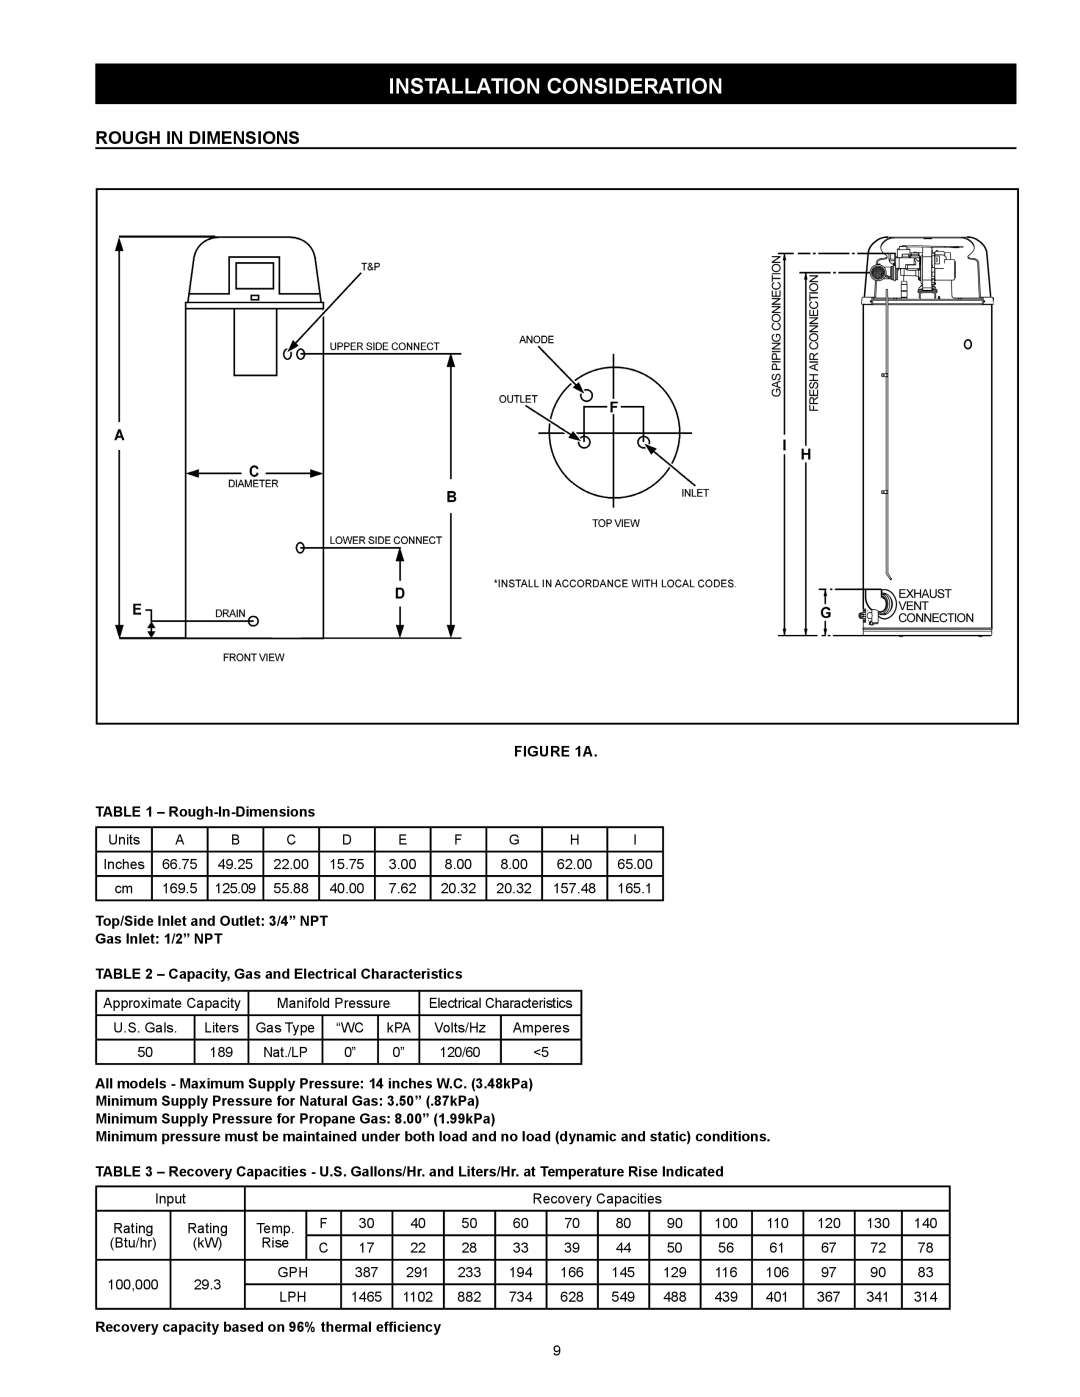 American Water Heater VG6250T100 instruction manual installation consideration, Rough In Dimensions, A, Rough-In-Dimensions 